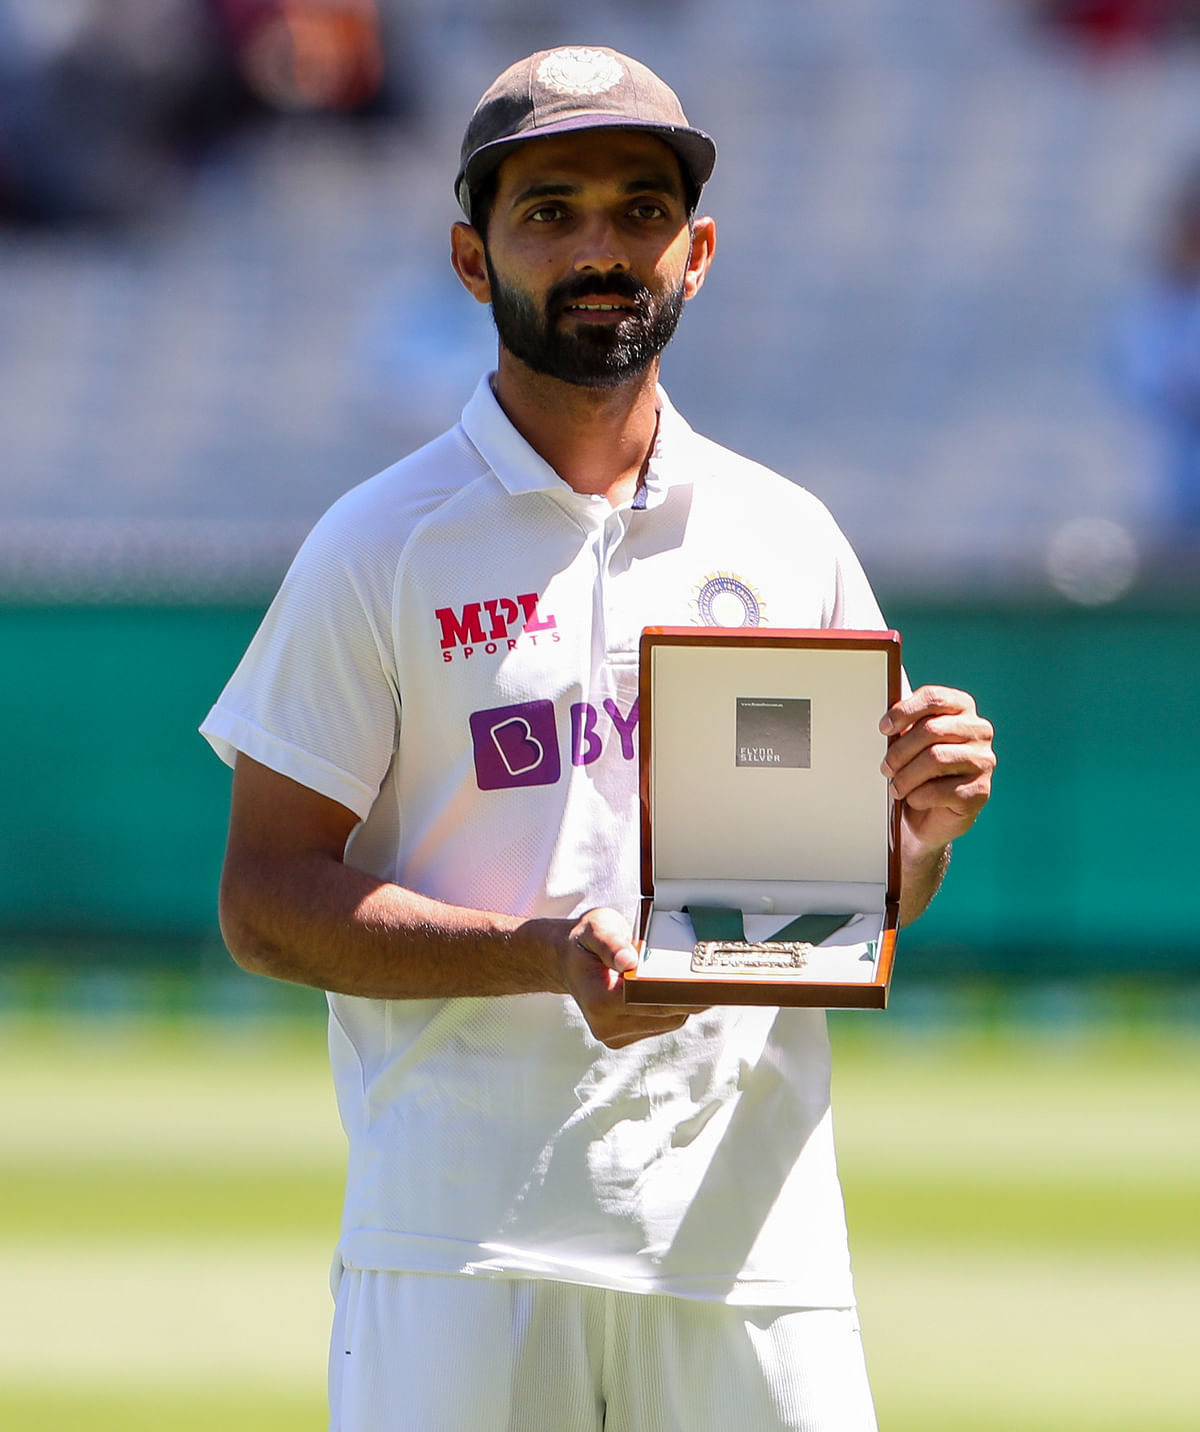 Rahane is captaining India for the final 3 Tests of the Border-Gavaskar trophy after Virat returned home to India.